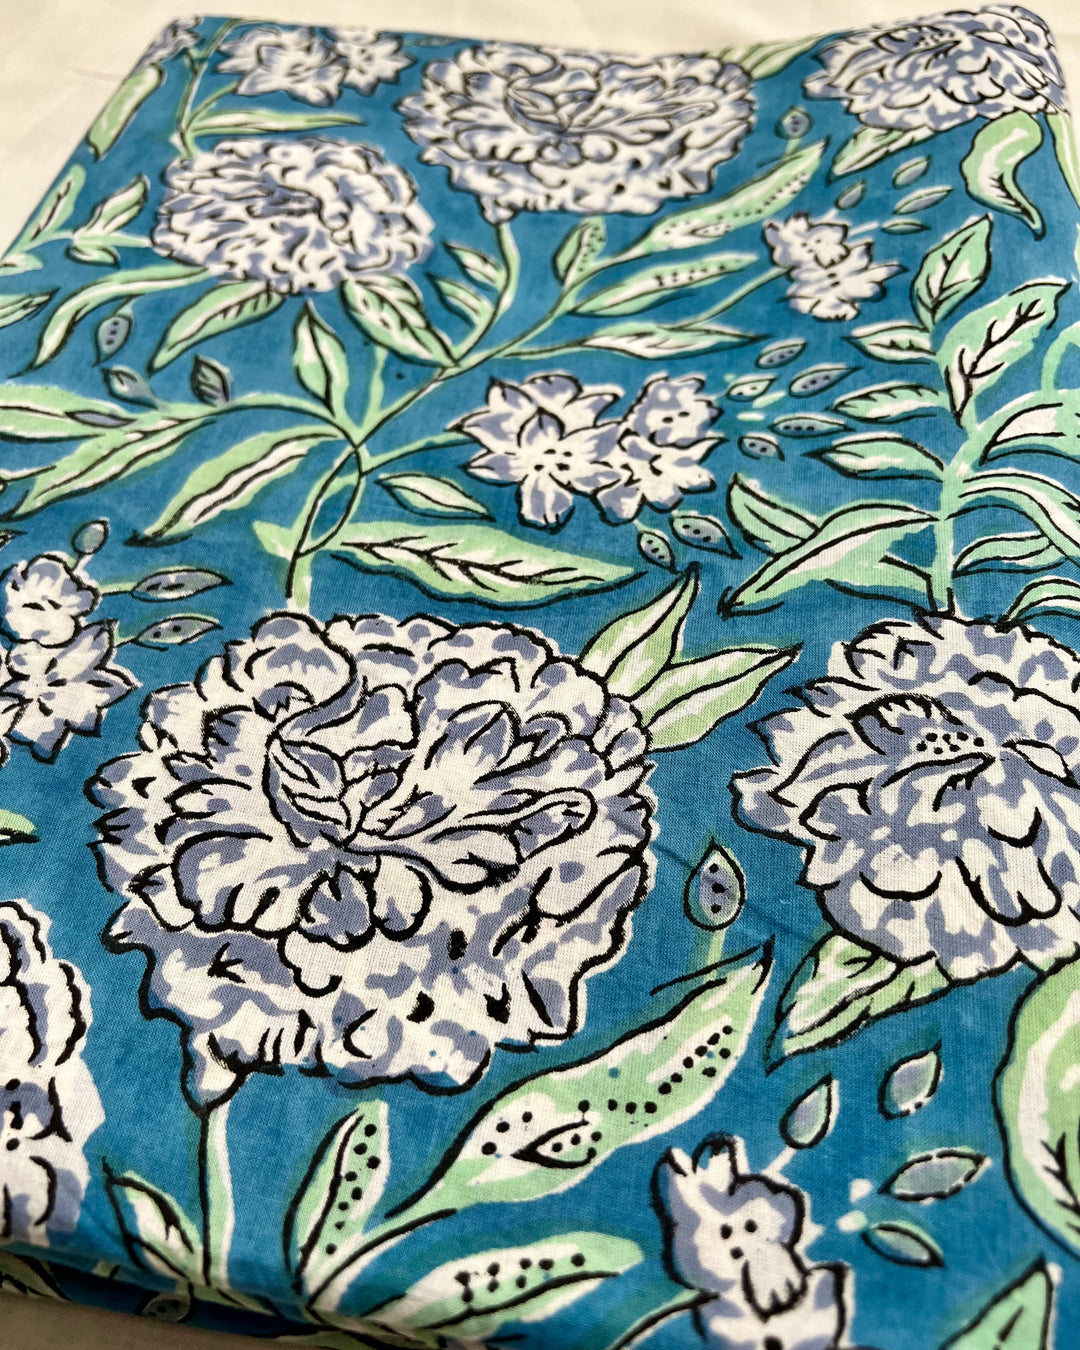 Blue Jaal Floral Block Print Cotton Fabric